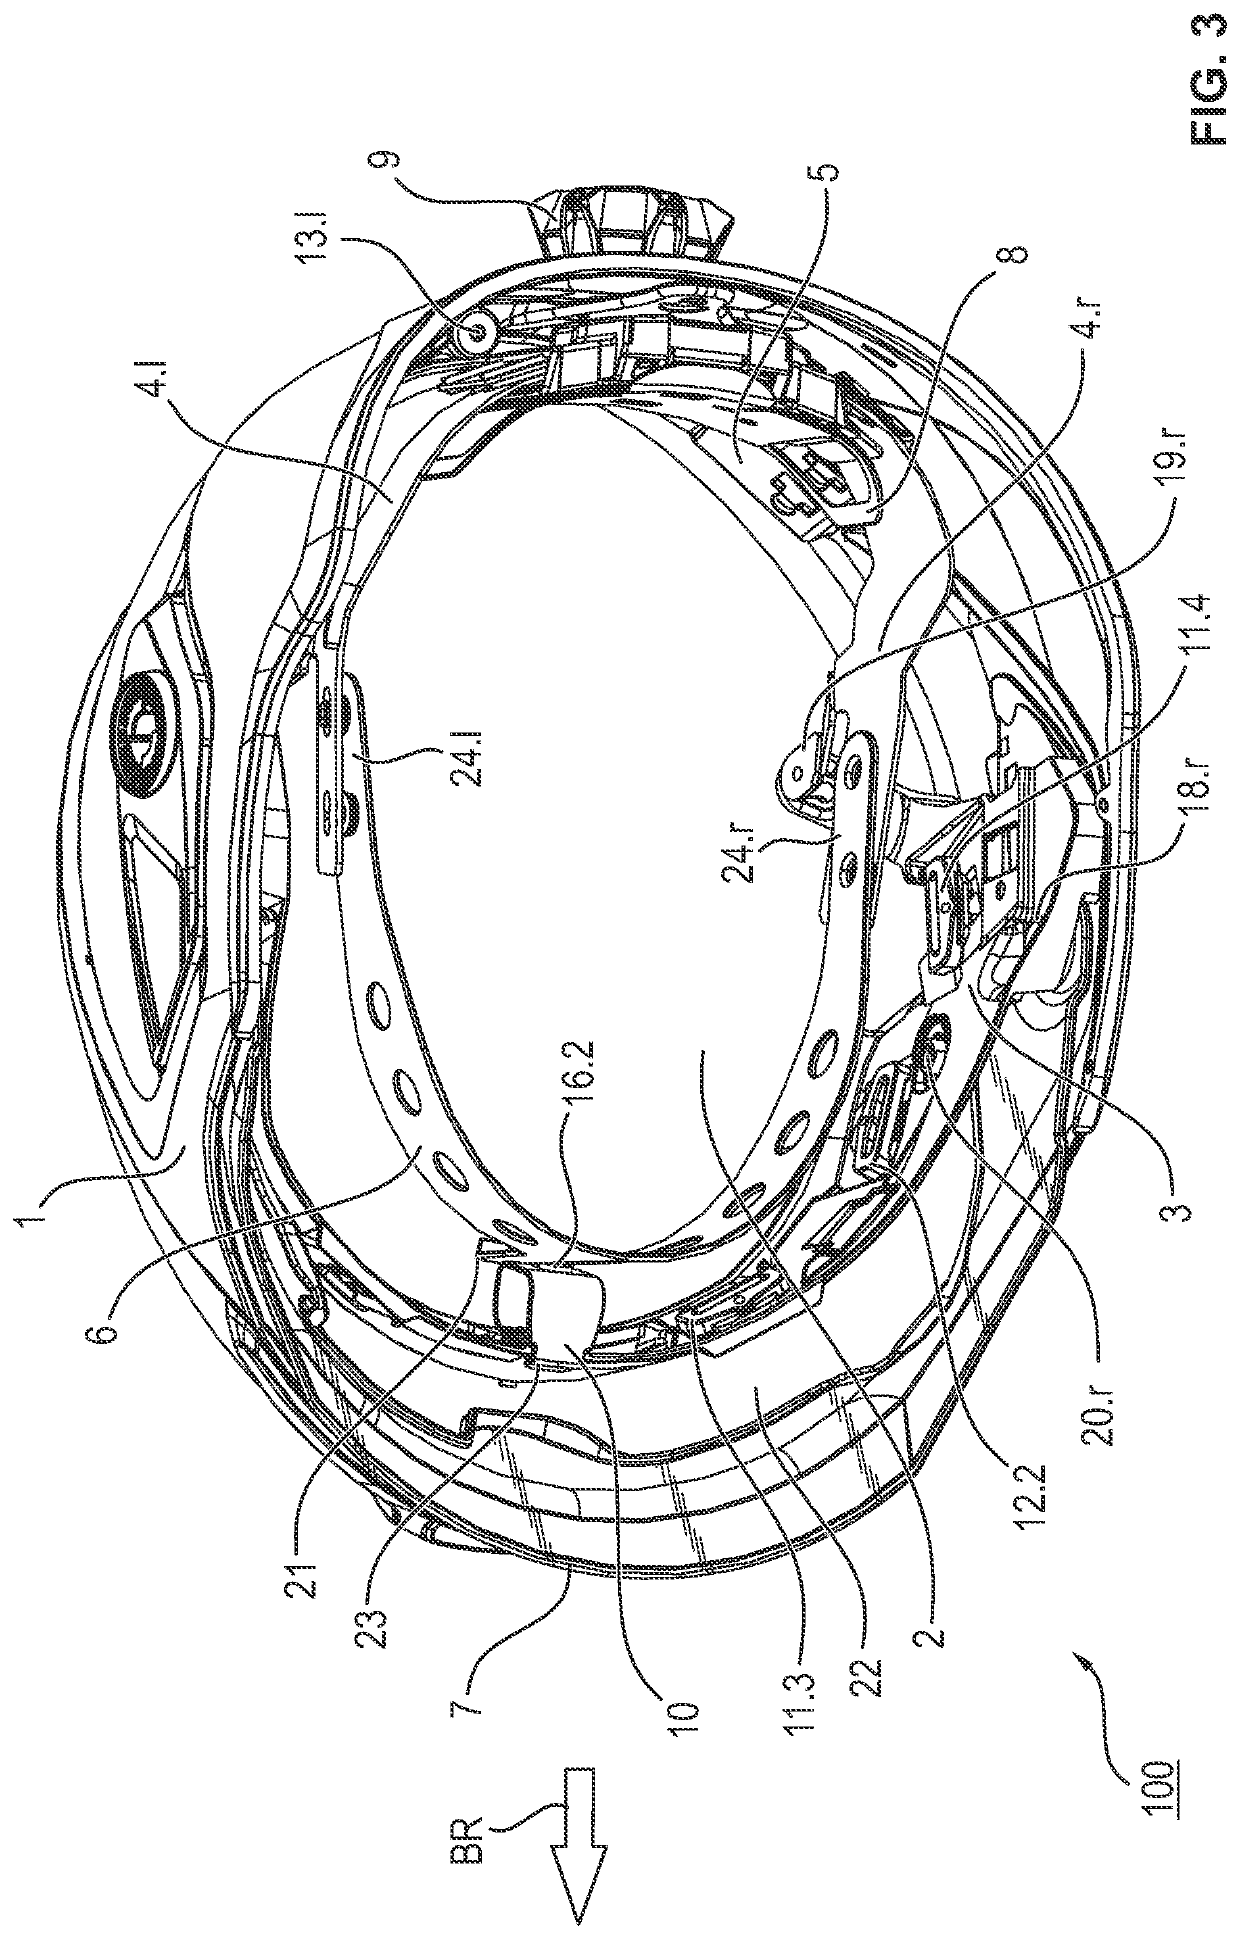 Safety helmet with mechanical coding for plug connections between the inner lining and the bearing structure